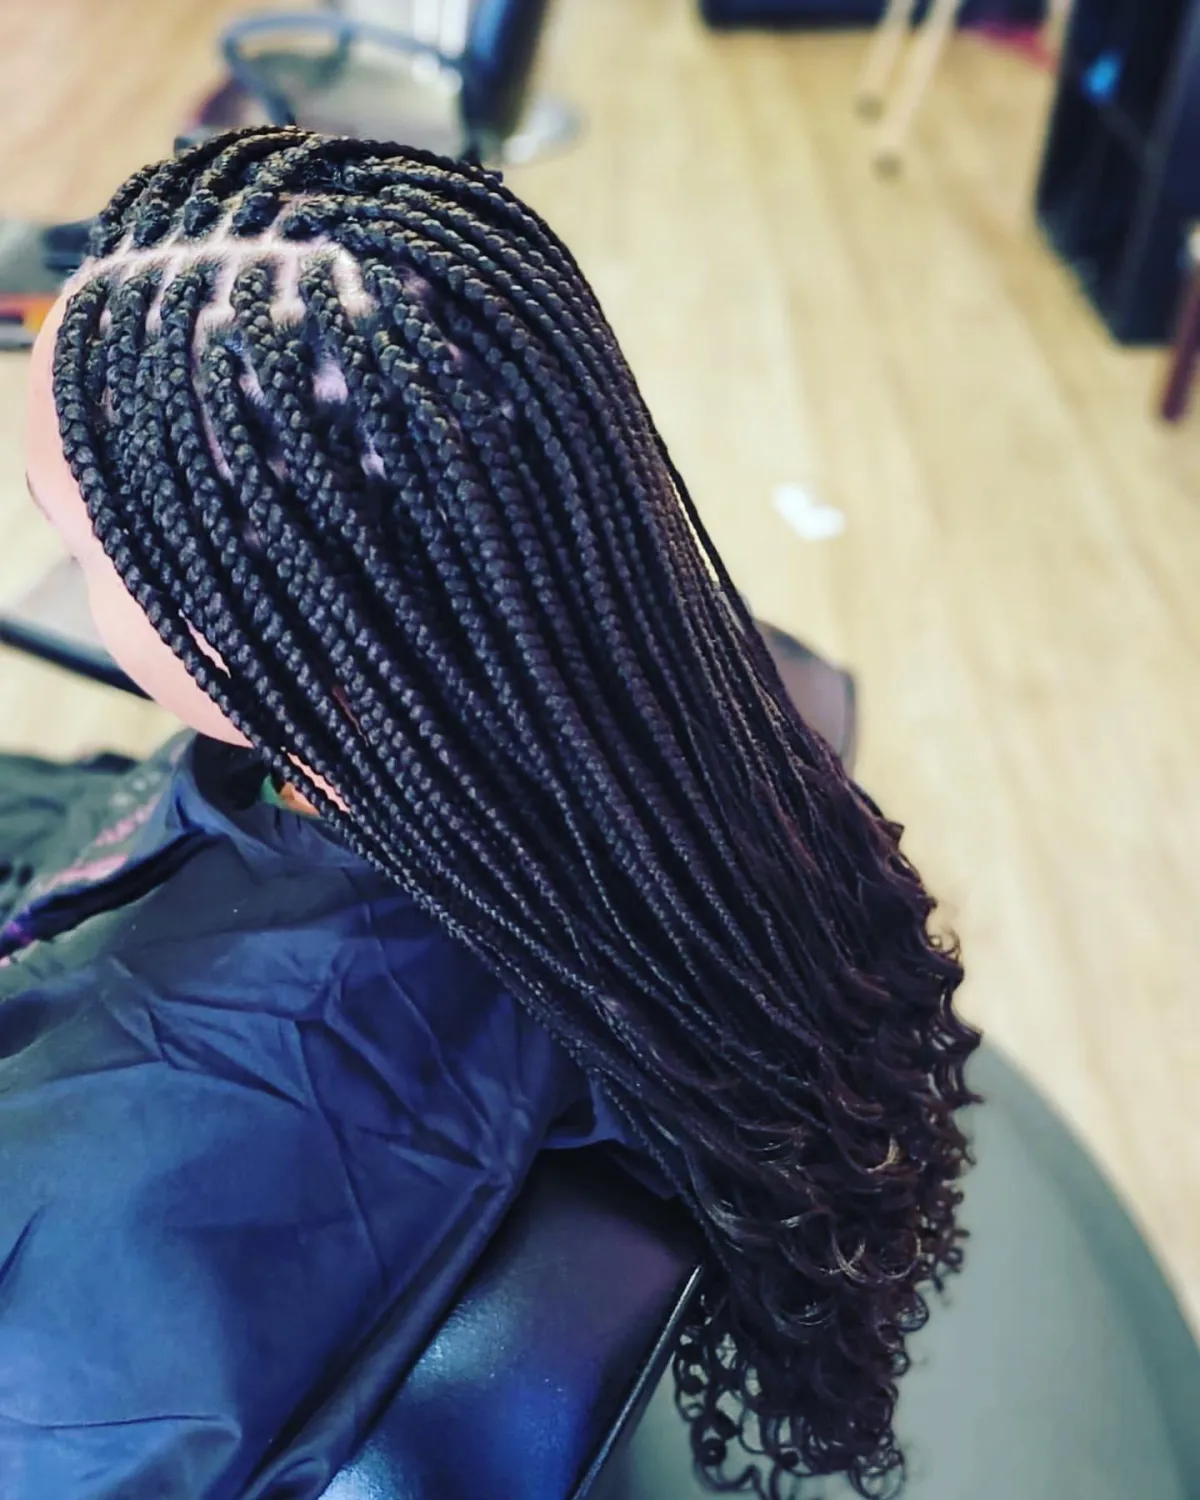 Intricate box braids by the skilled stylists at Mary Braids, Omaha's finest hair braiding salon, symbolizing cultural pride and fashion.